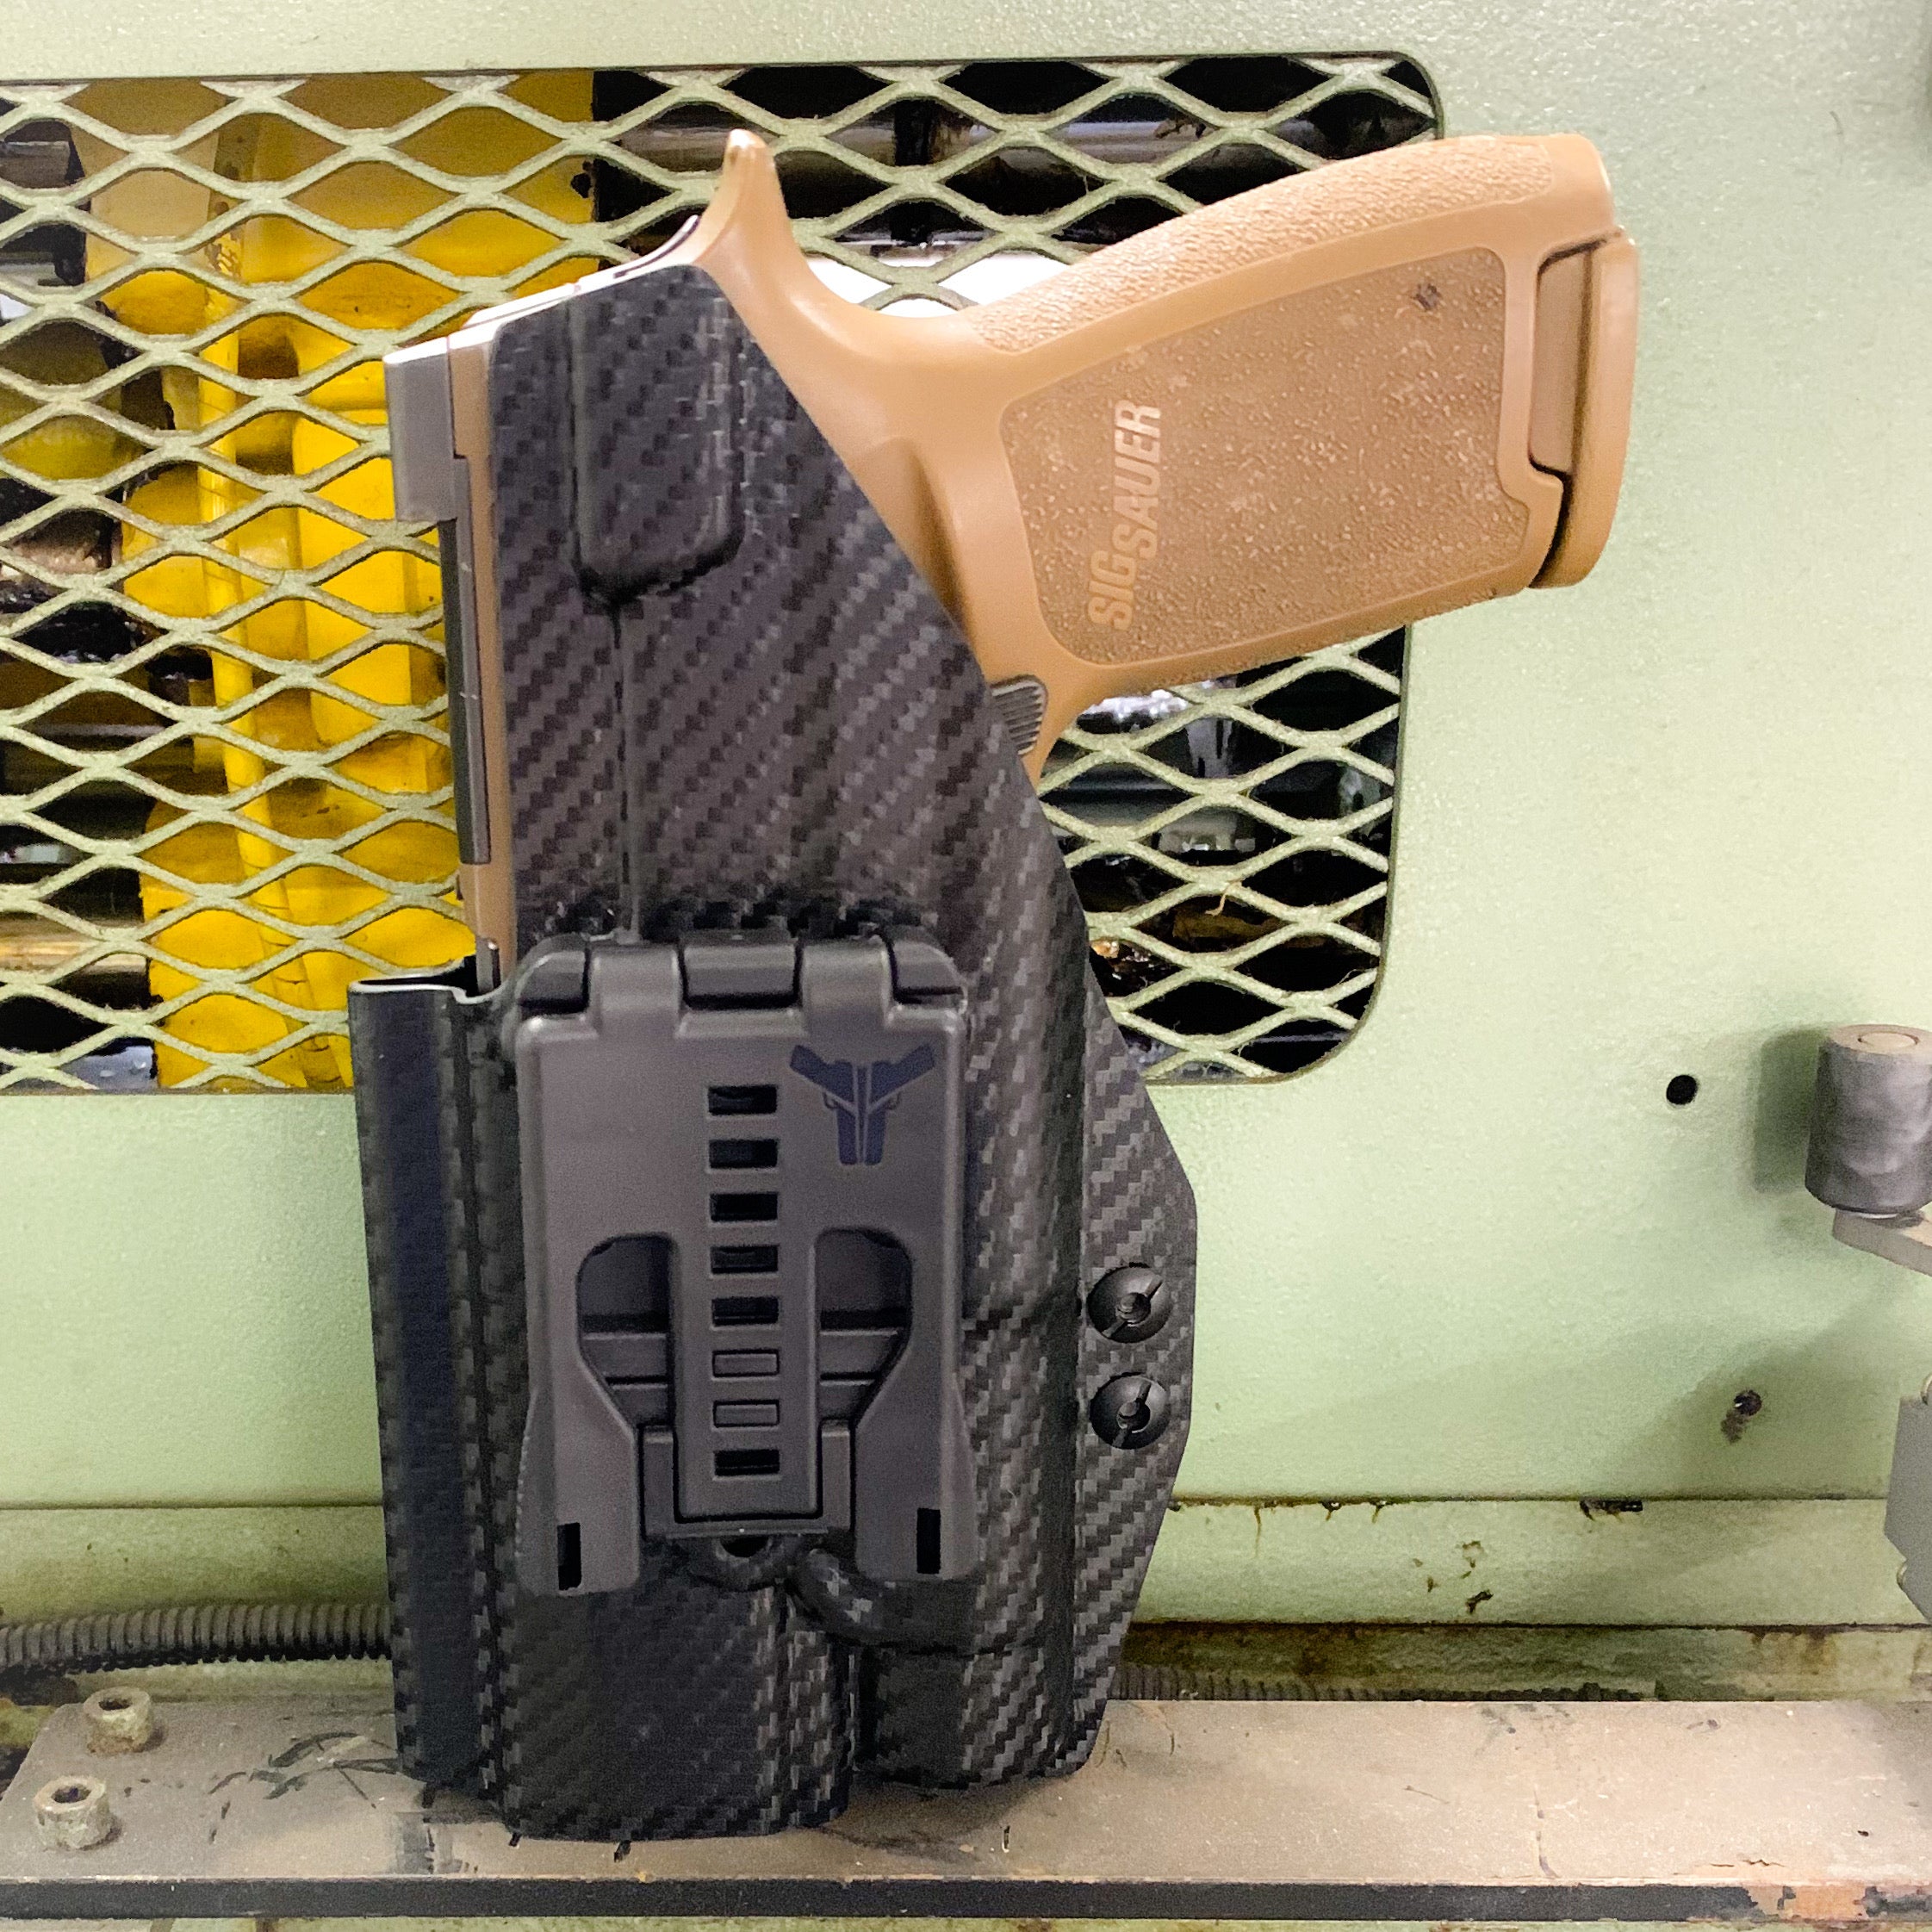 For the best Outside Waistband OWB Holster designed to fit the Sig Sauer P320 Full Size, Carry, Compact, M17, M18, and X-Five, X5 pistols with the Streamlight TLR-1, shop Four Brothers Holsters.  Full sweat guard, adjustable retention. Made from .080" kydex with minimal material and smooth edges to reduce printing 